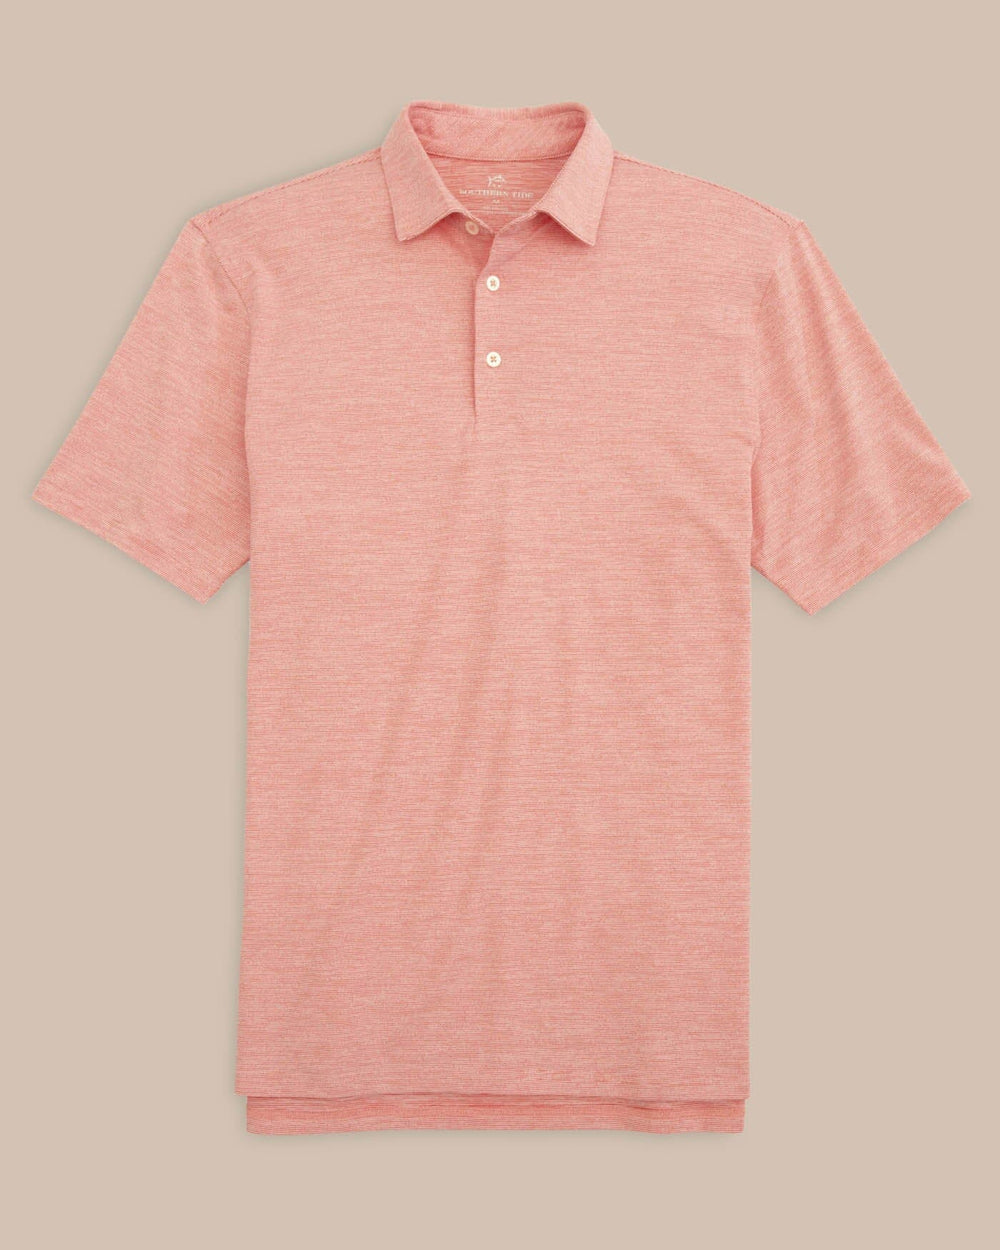 The front view of the Team Colors Driver Spacedye Polo Shirt by Southern Tide - Varsity Red